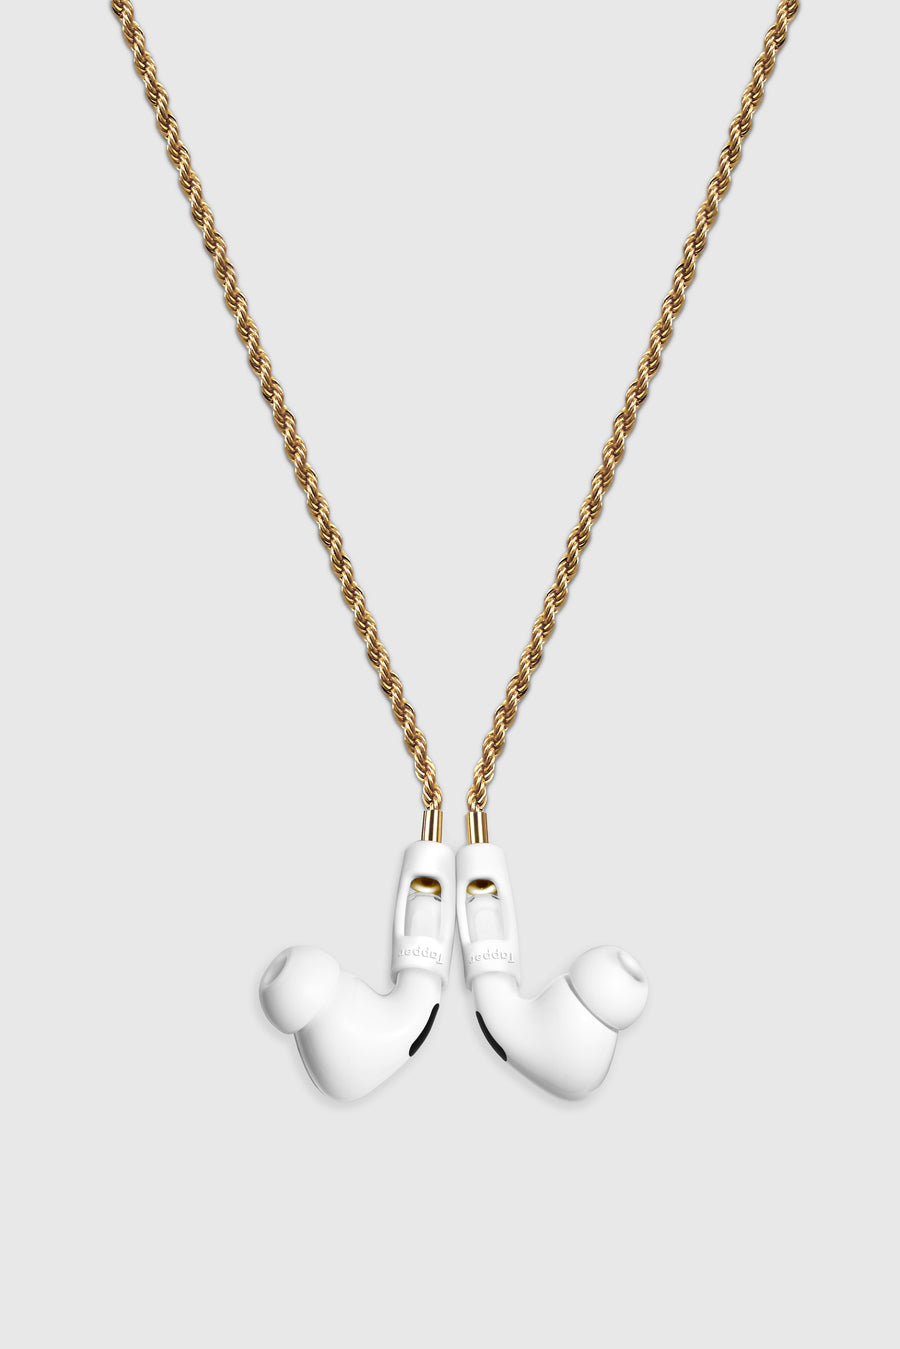 Tapper's real 18K gold plated original rope chain jewelry necklace protects your Apple AirPods & AirPods Pro. The luxurious, elevated & accessible rope chain jewellery plated in precious metals snaps the AirPods around your neck. Lose your AirPods? Magnetic lock for convenient and hassle-free safekeeping around your neck. The next must-have & affordable AirPods accessory crafted for ultimate luxury. Compatible with AirPods & AirPods Pro. Designed in Sweden by Tapper. Free Shipping at gettapper.com